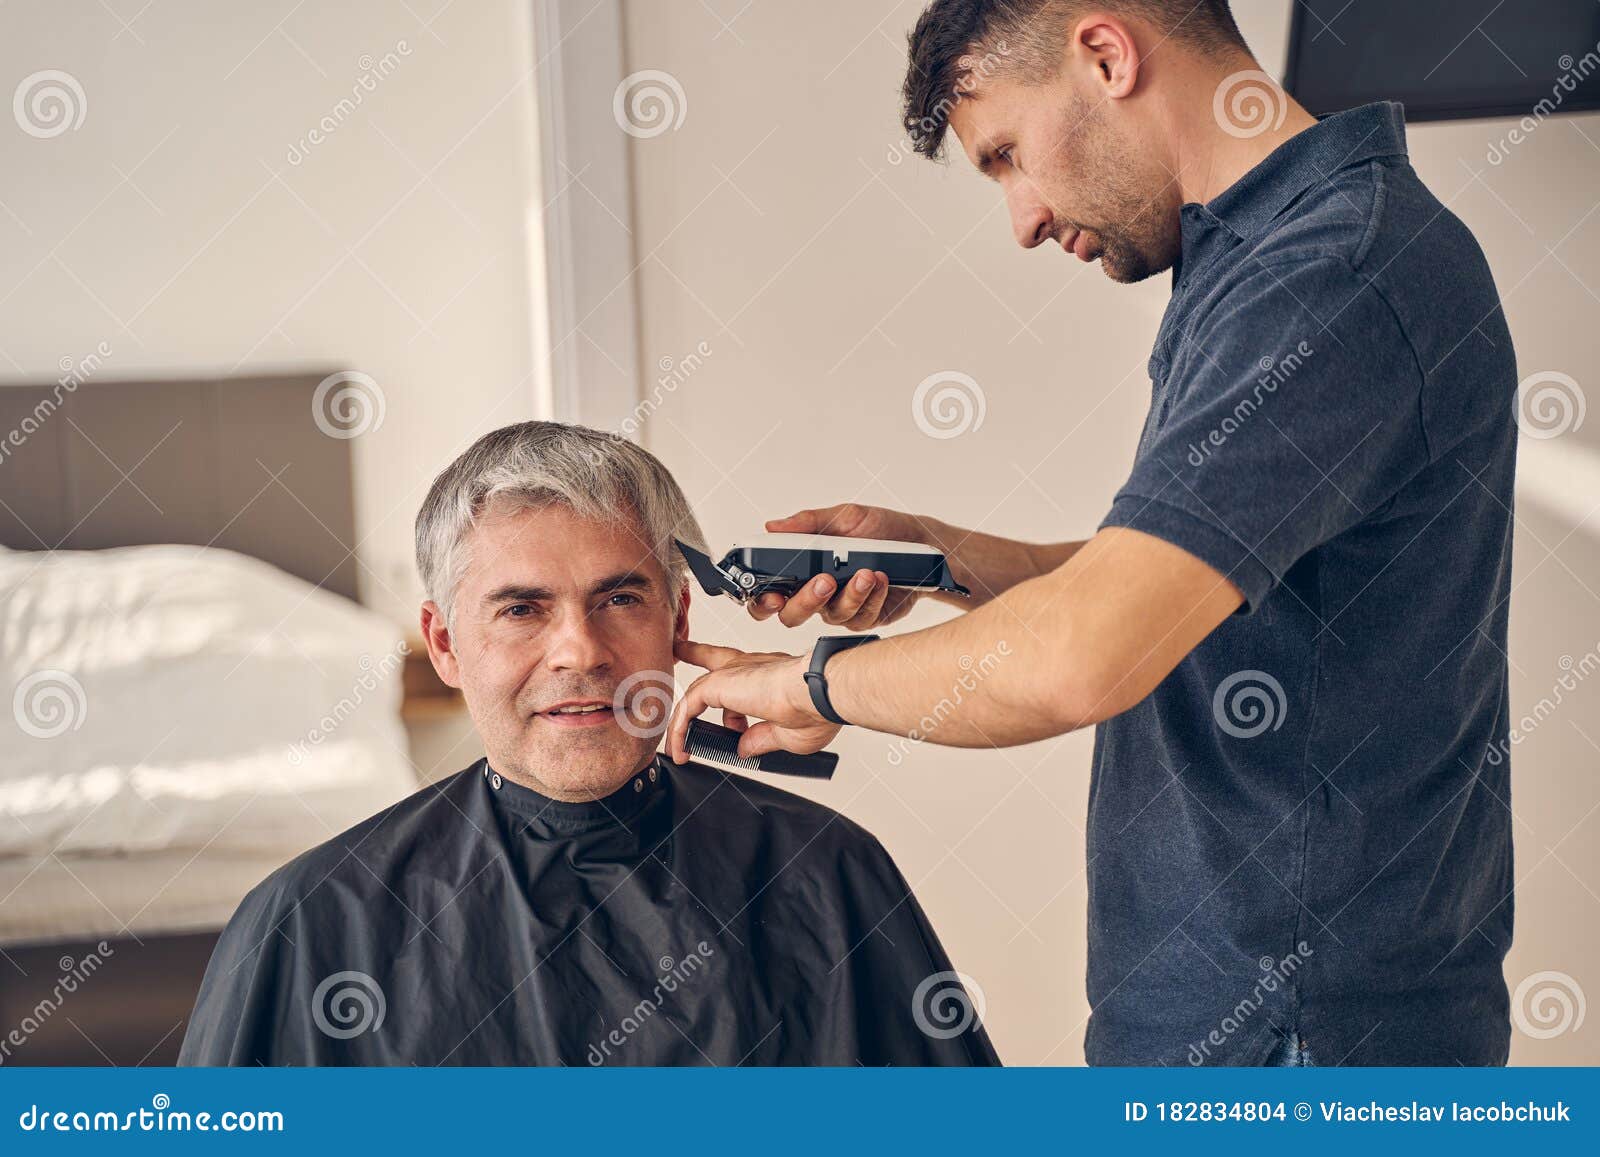 Male Client Getting Haircut by Hairdresser at Home Stock Photo - Image of  barber, indoors: 182834804